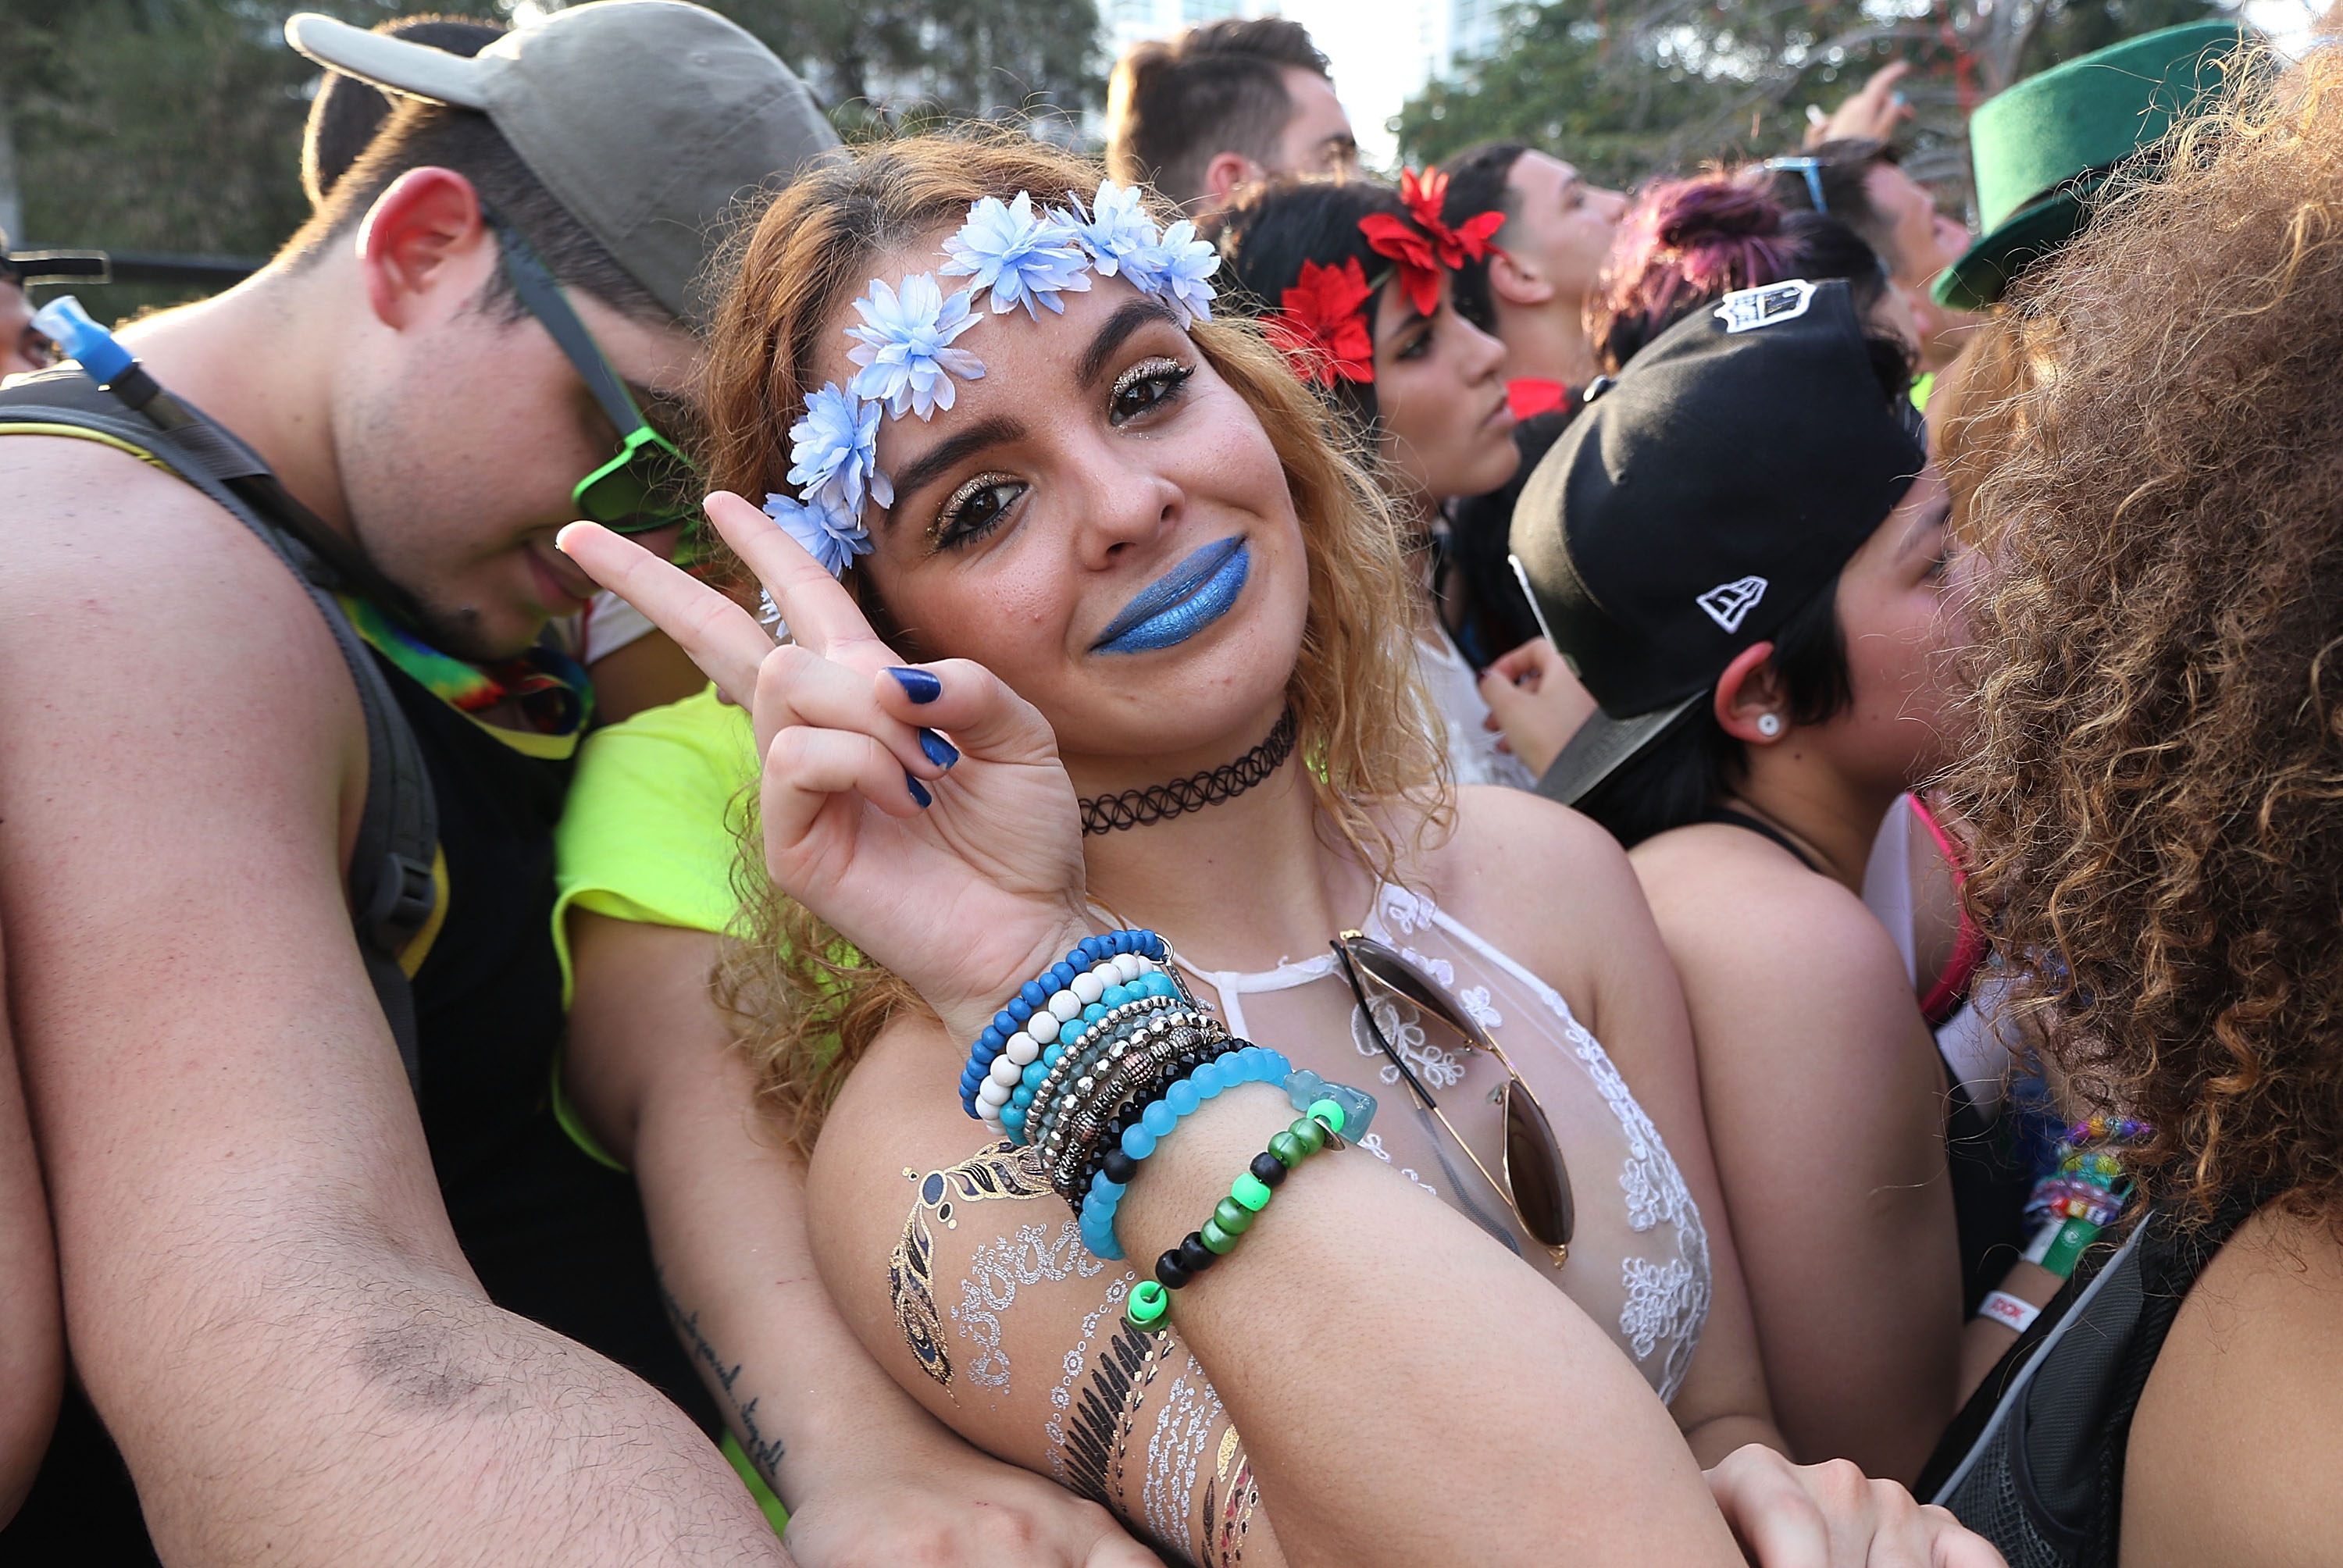 Through this young woman's flower crown and peace sign, the chemically-induced decadence of the '60s survives, but the culture of art and the youth in revolt does not. The new 'love crowd' are simply consumers.